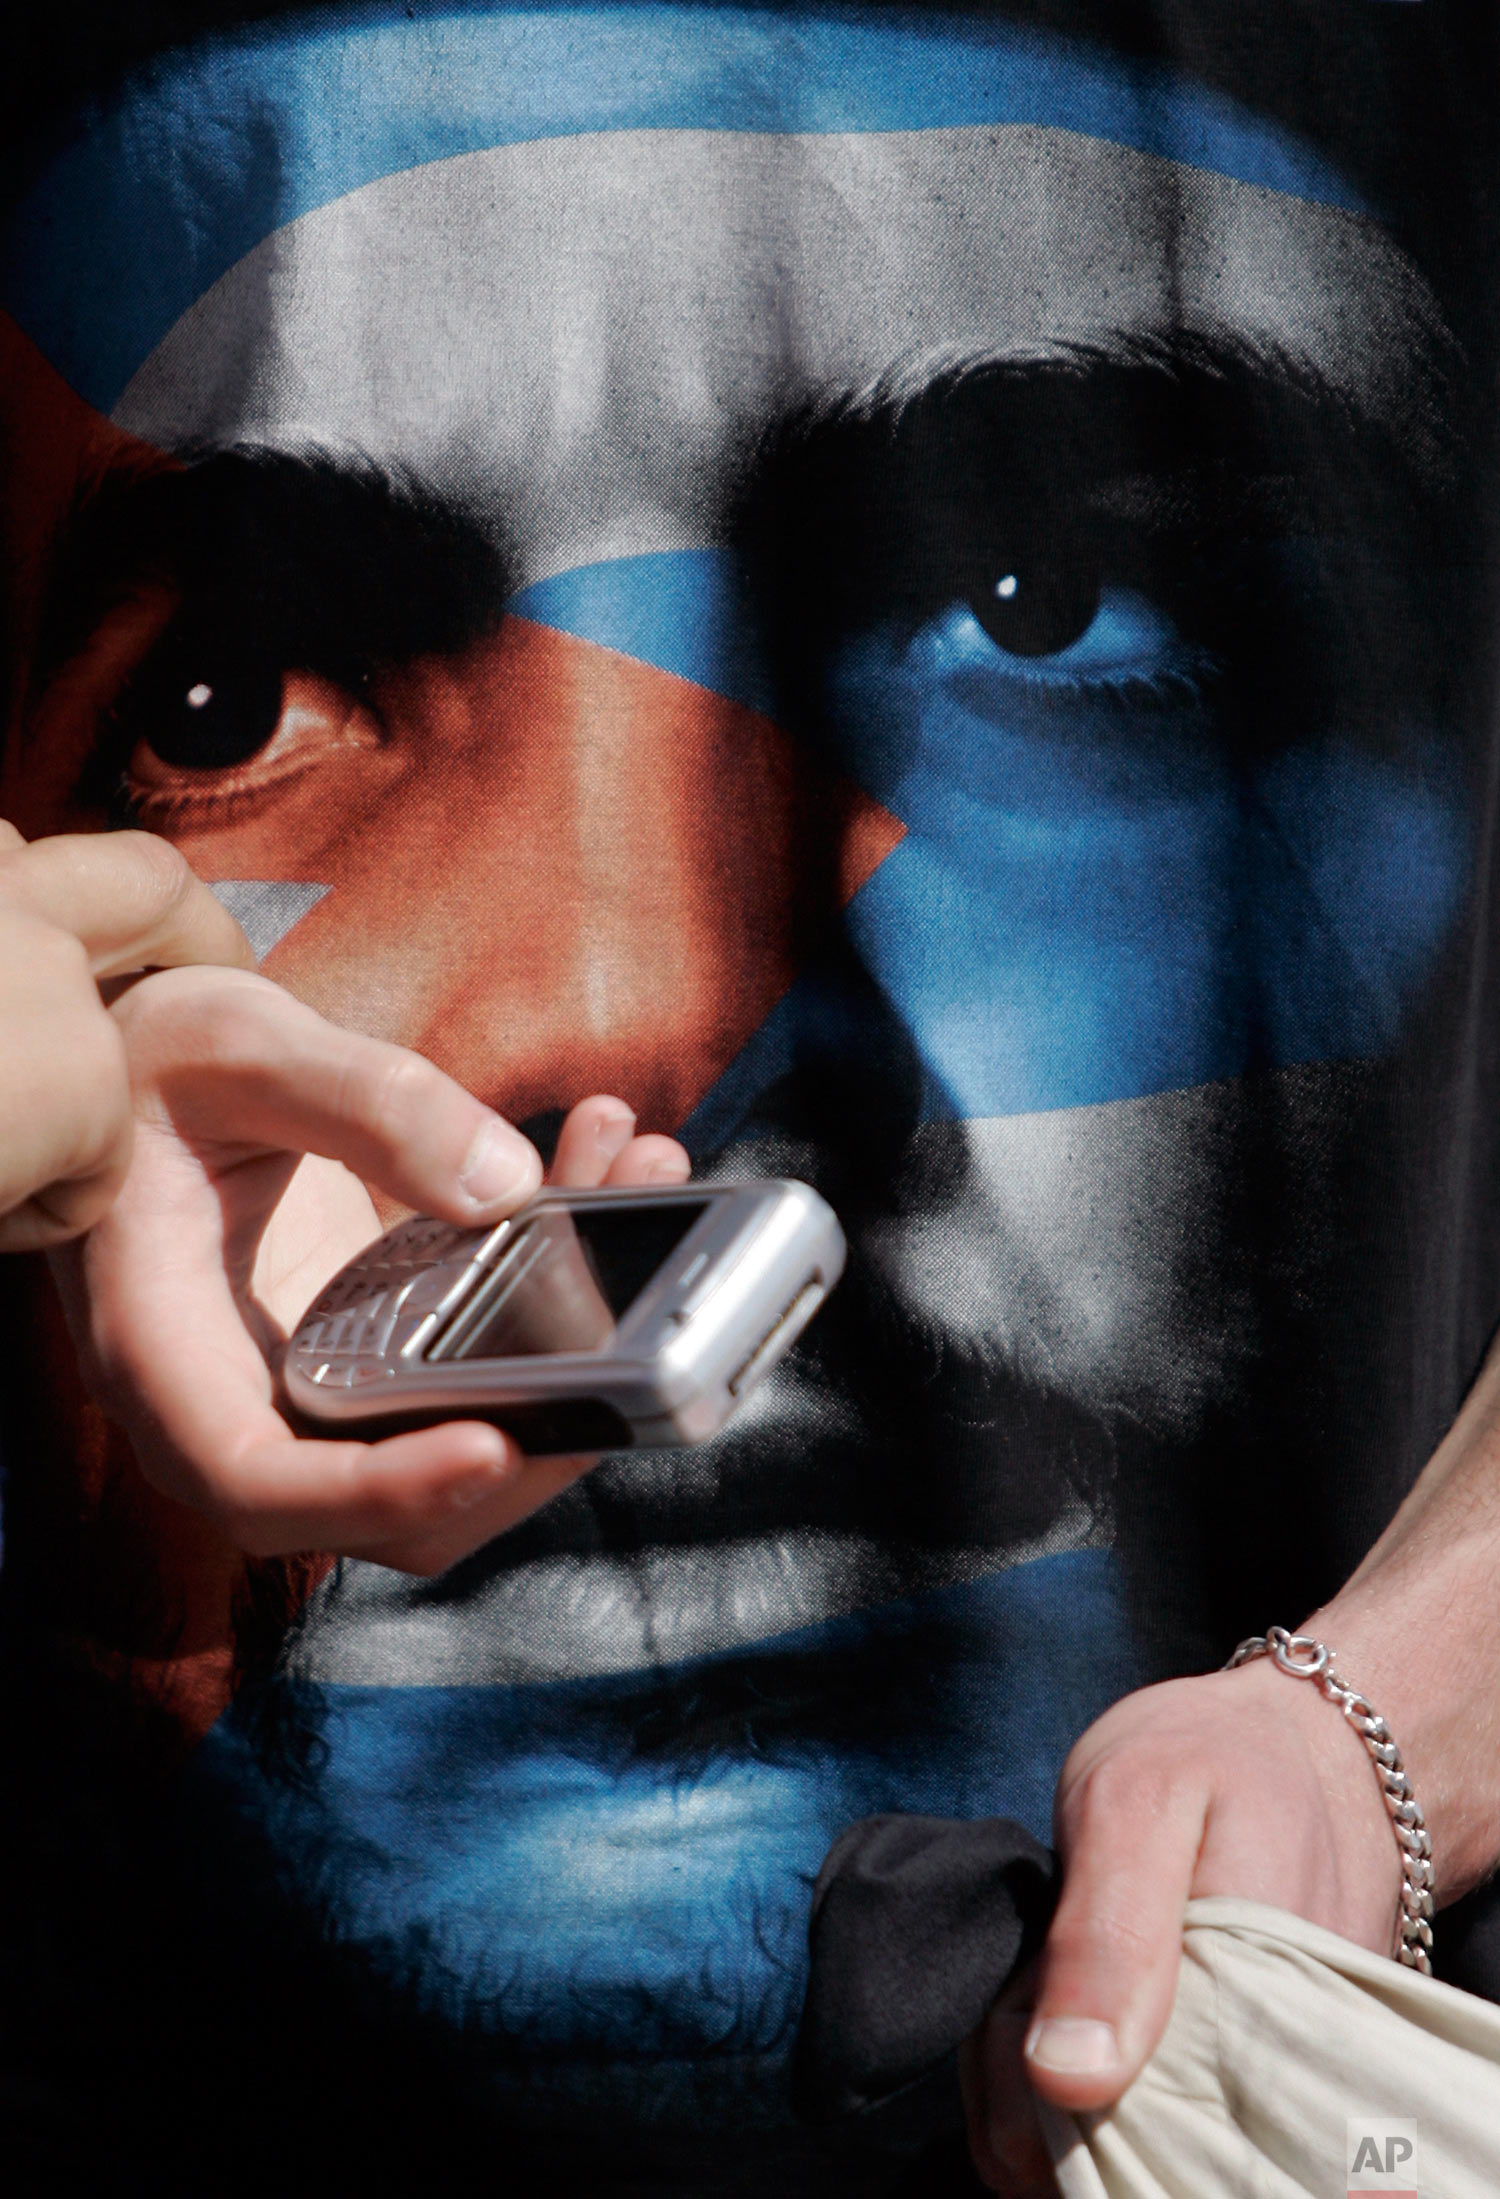  A young man wearing a T-shirt with an image of Cuban revolution leader Ernesto Che Guevara, shows a cellular phone to a friend during a Workers' Day march Thursday, May 1 2008, in Lisbon. (AP Photo/Armando Franca) 